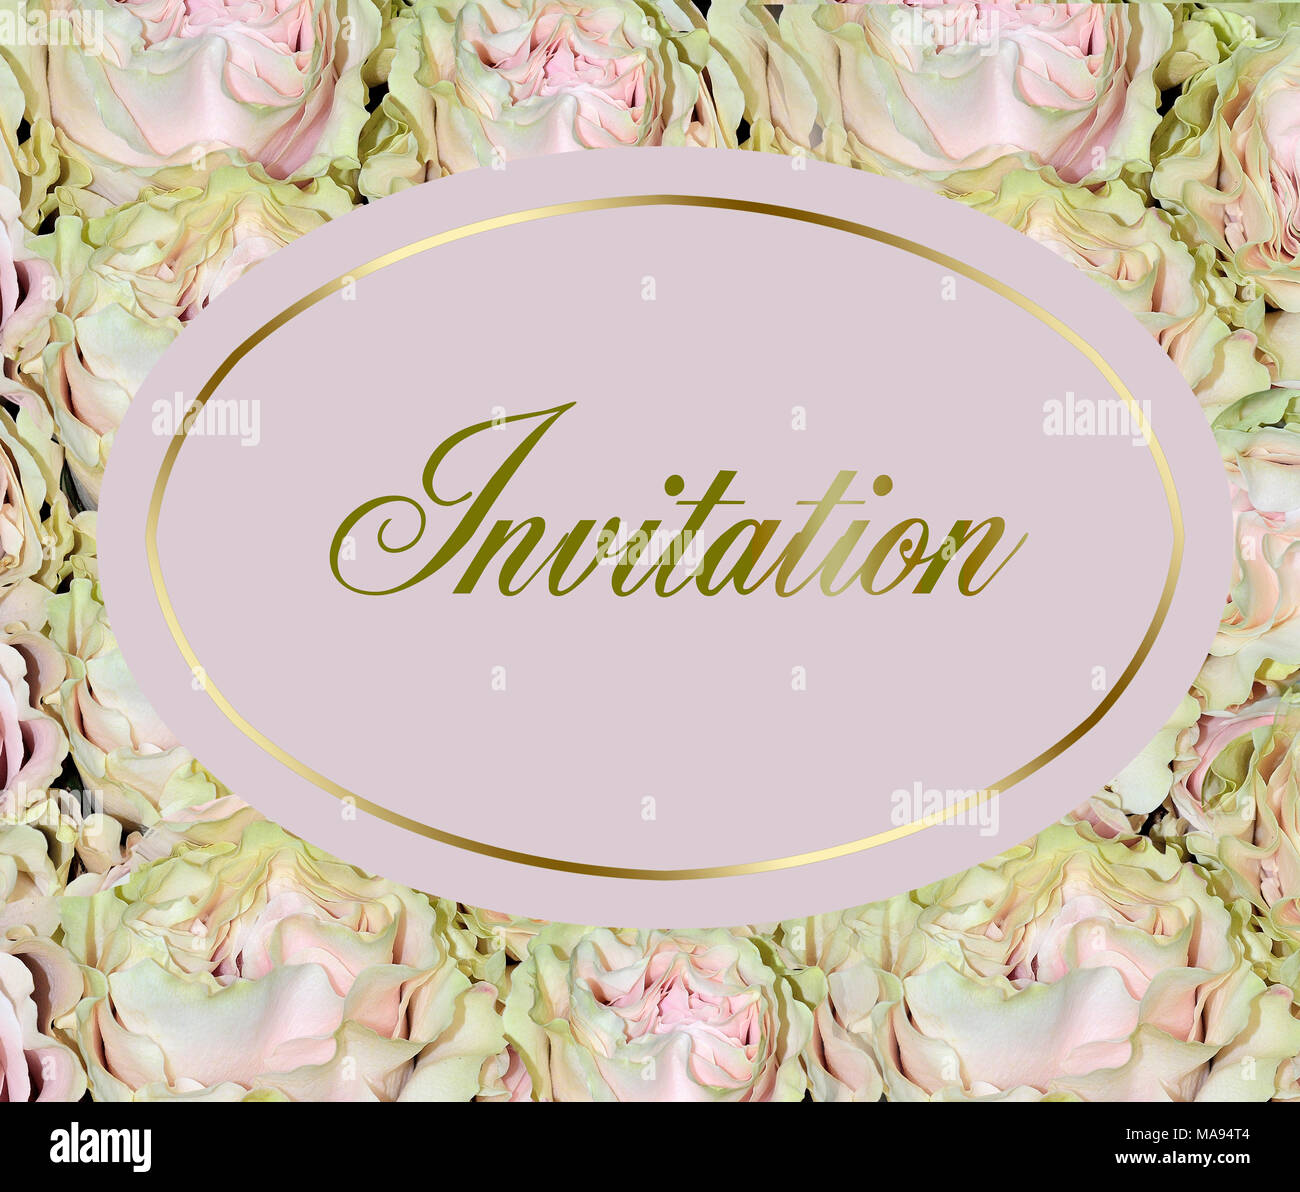 Beautiful wedding invitation with gentle pink roses with pale-green tint of petals  - elegant floral background, romantic art design with golden text  Stock Photo